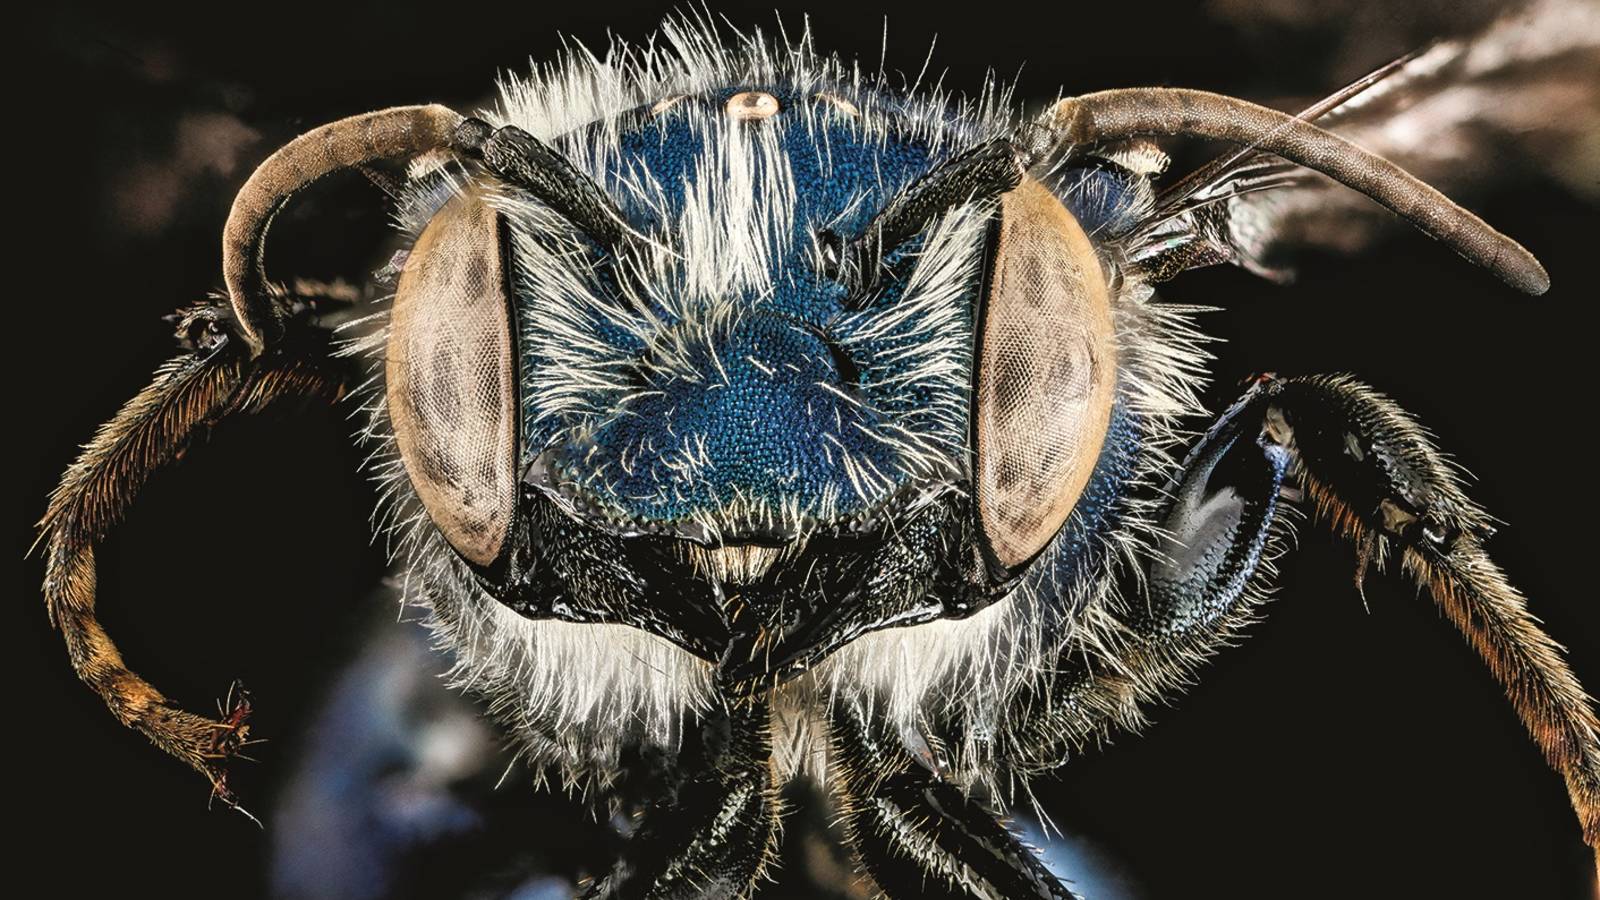 <h3 style="text-align: center; padding: 50px;"><span class="text-Intro-style"><em>Osmia chalybea</em> (bee), Cumberland Island National Seashore, Georgia. © SAM DROEGE/USGS BEE INVENTORY AND MONITORING LAB</span></h3>